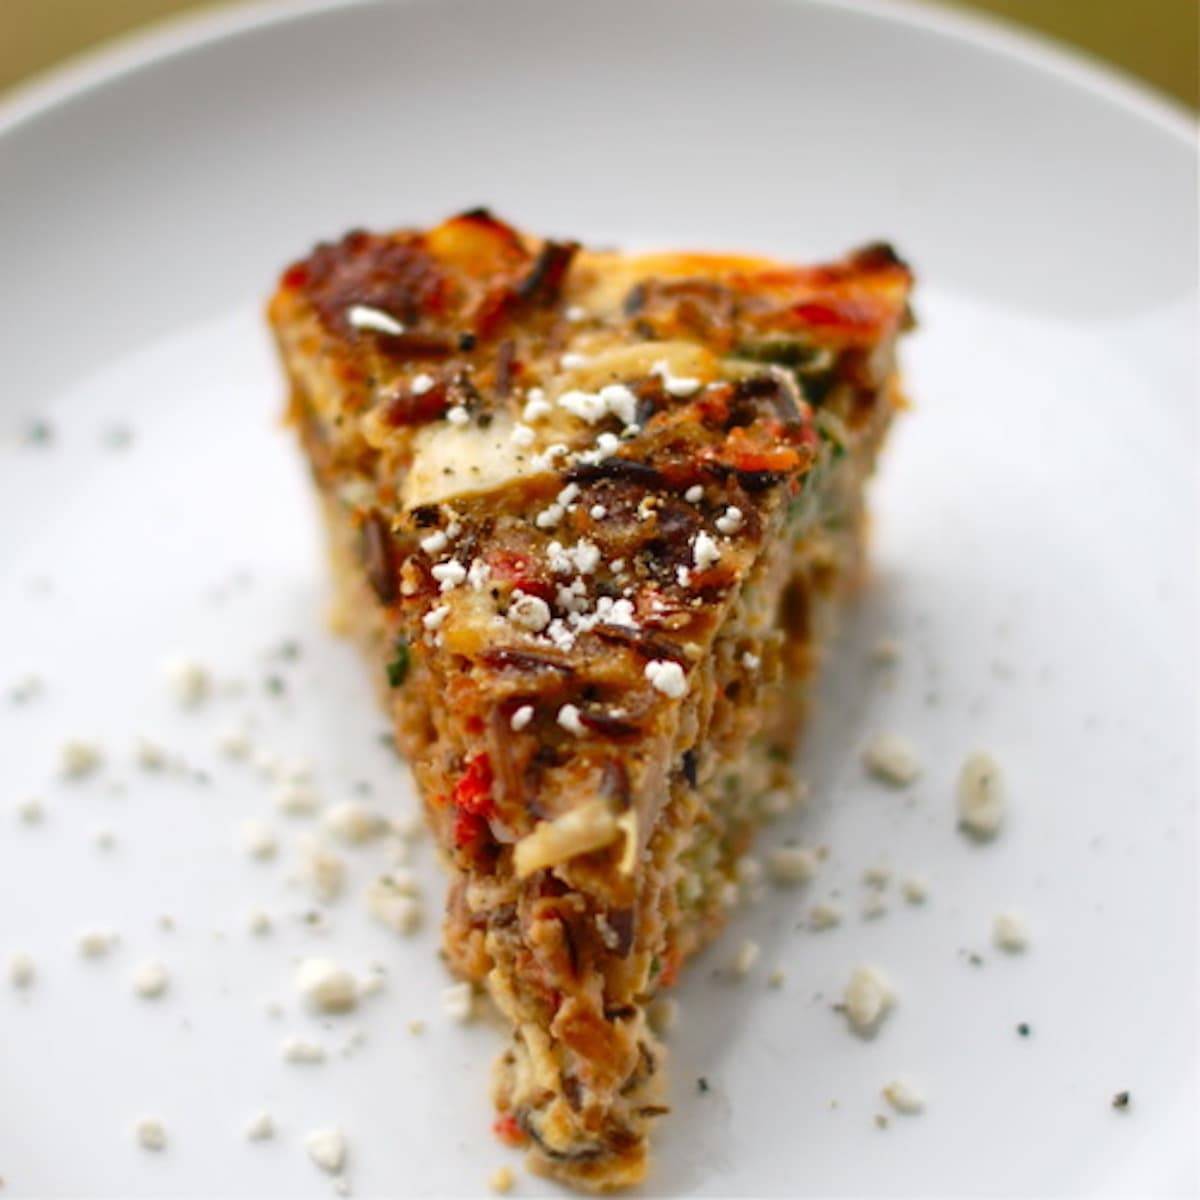 Sausage and red pepper quiche on a white plate.